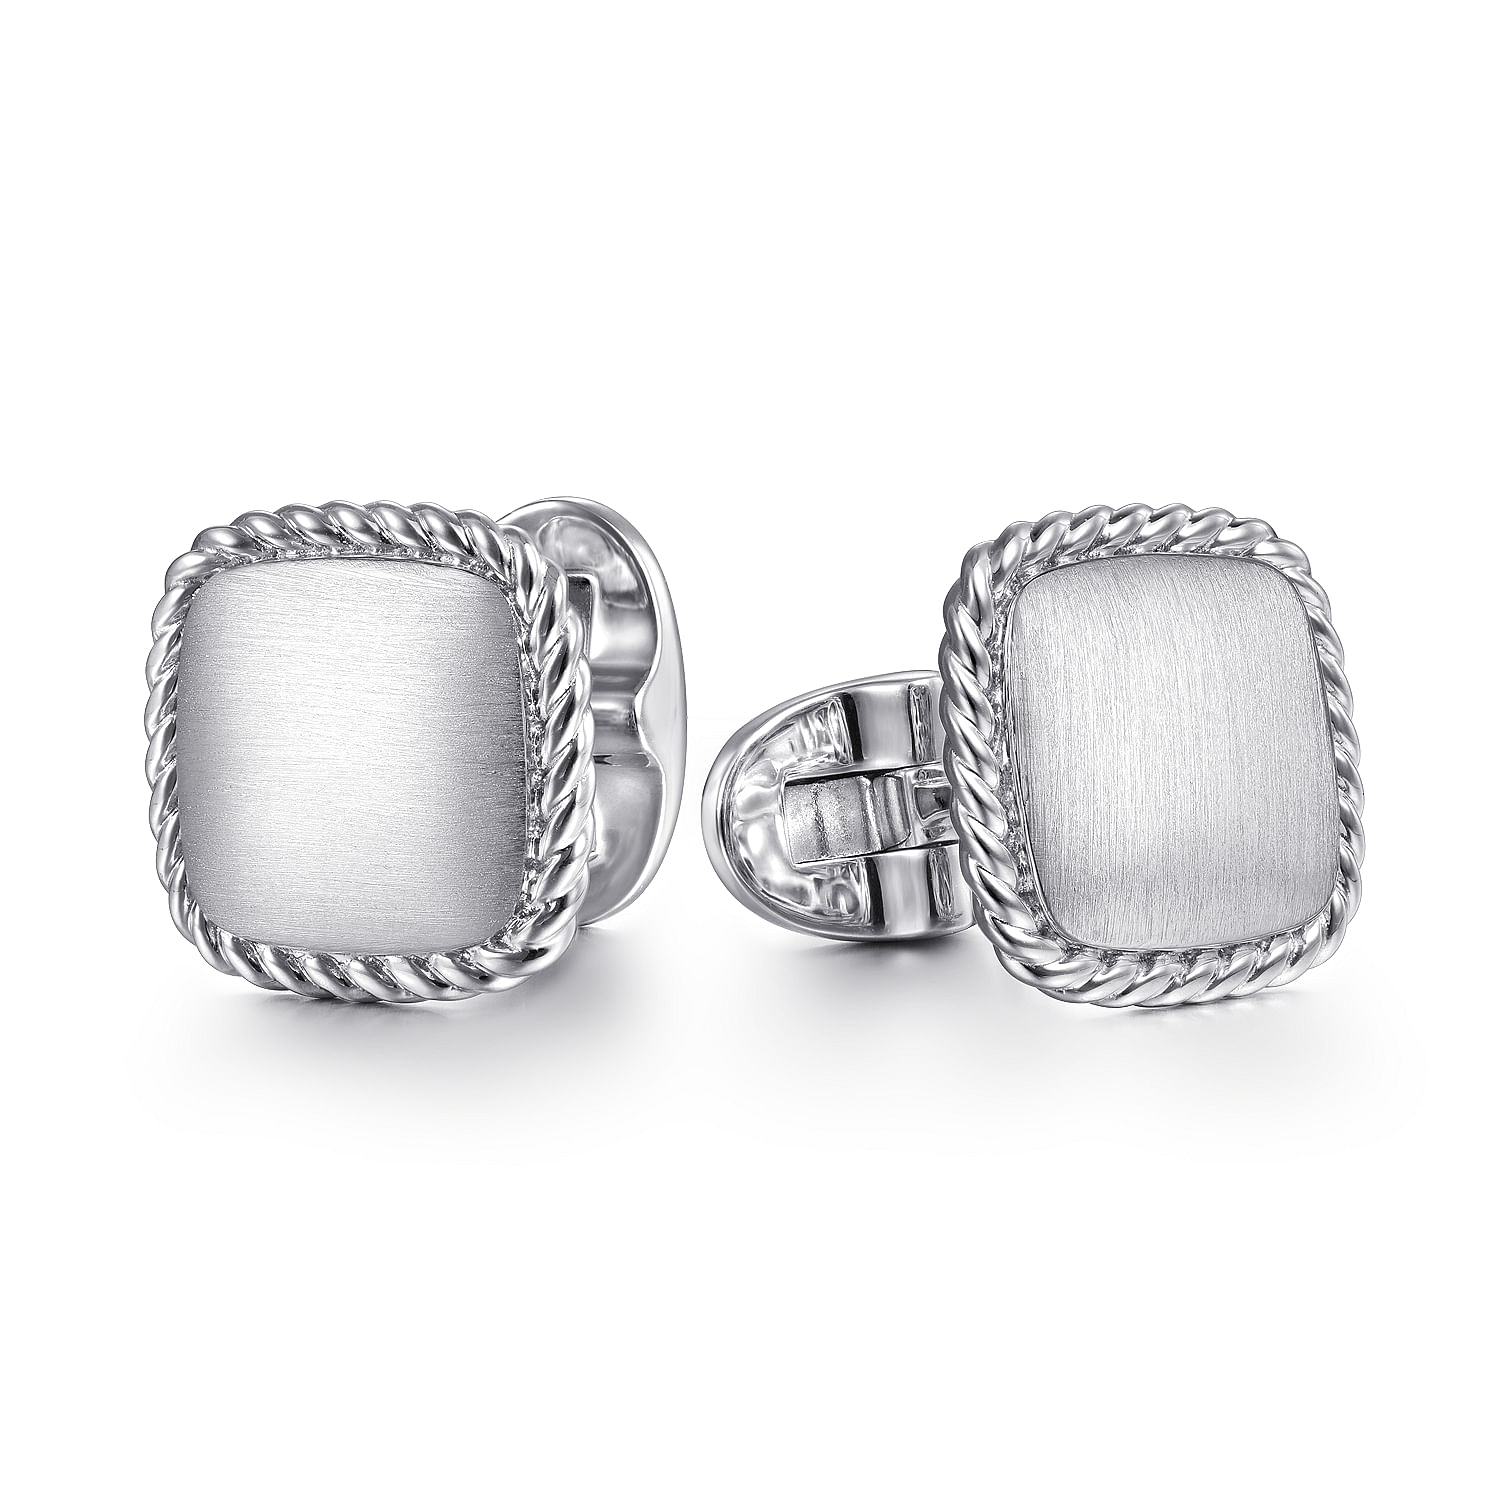 925 Sterling Silver Square Cufflinks with Twisted Rope Trim